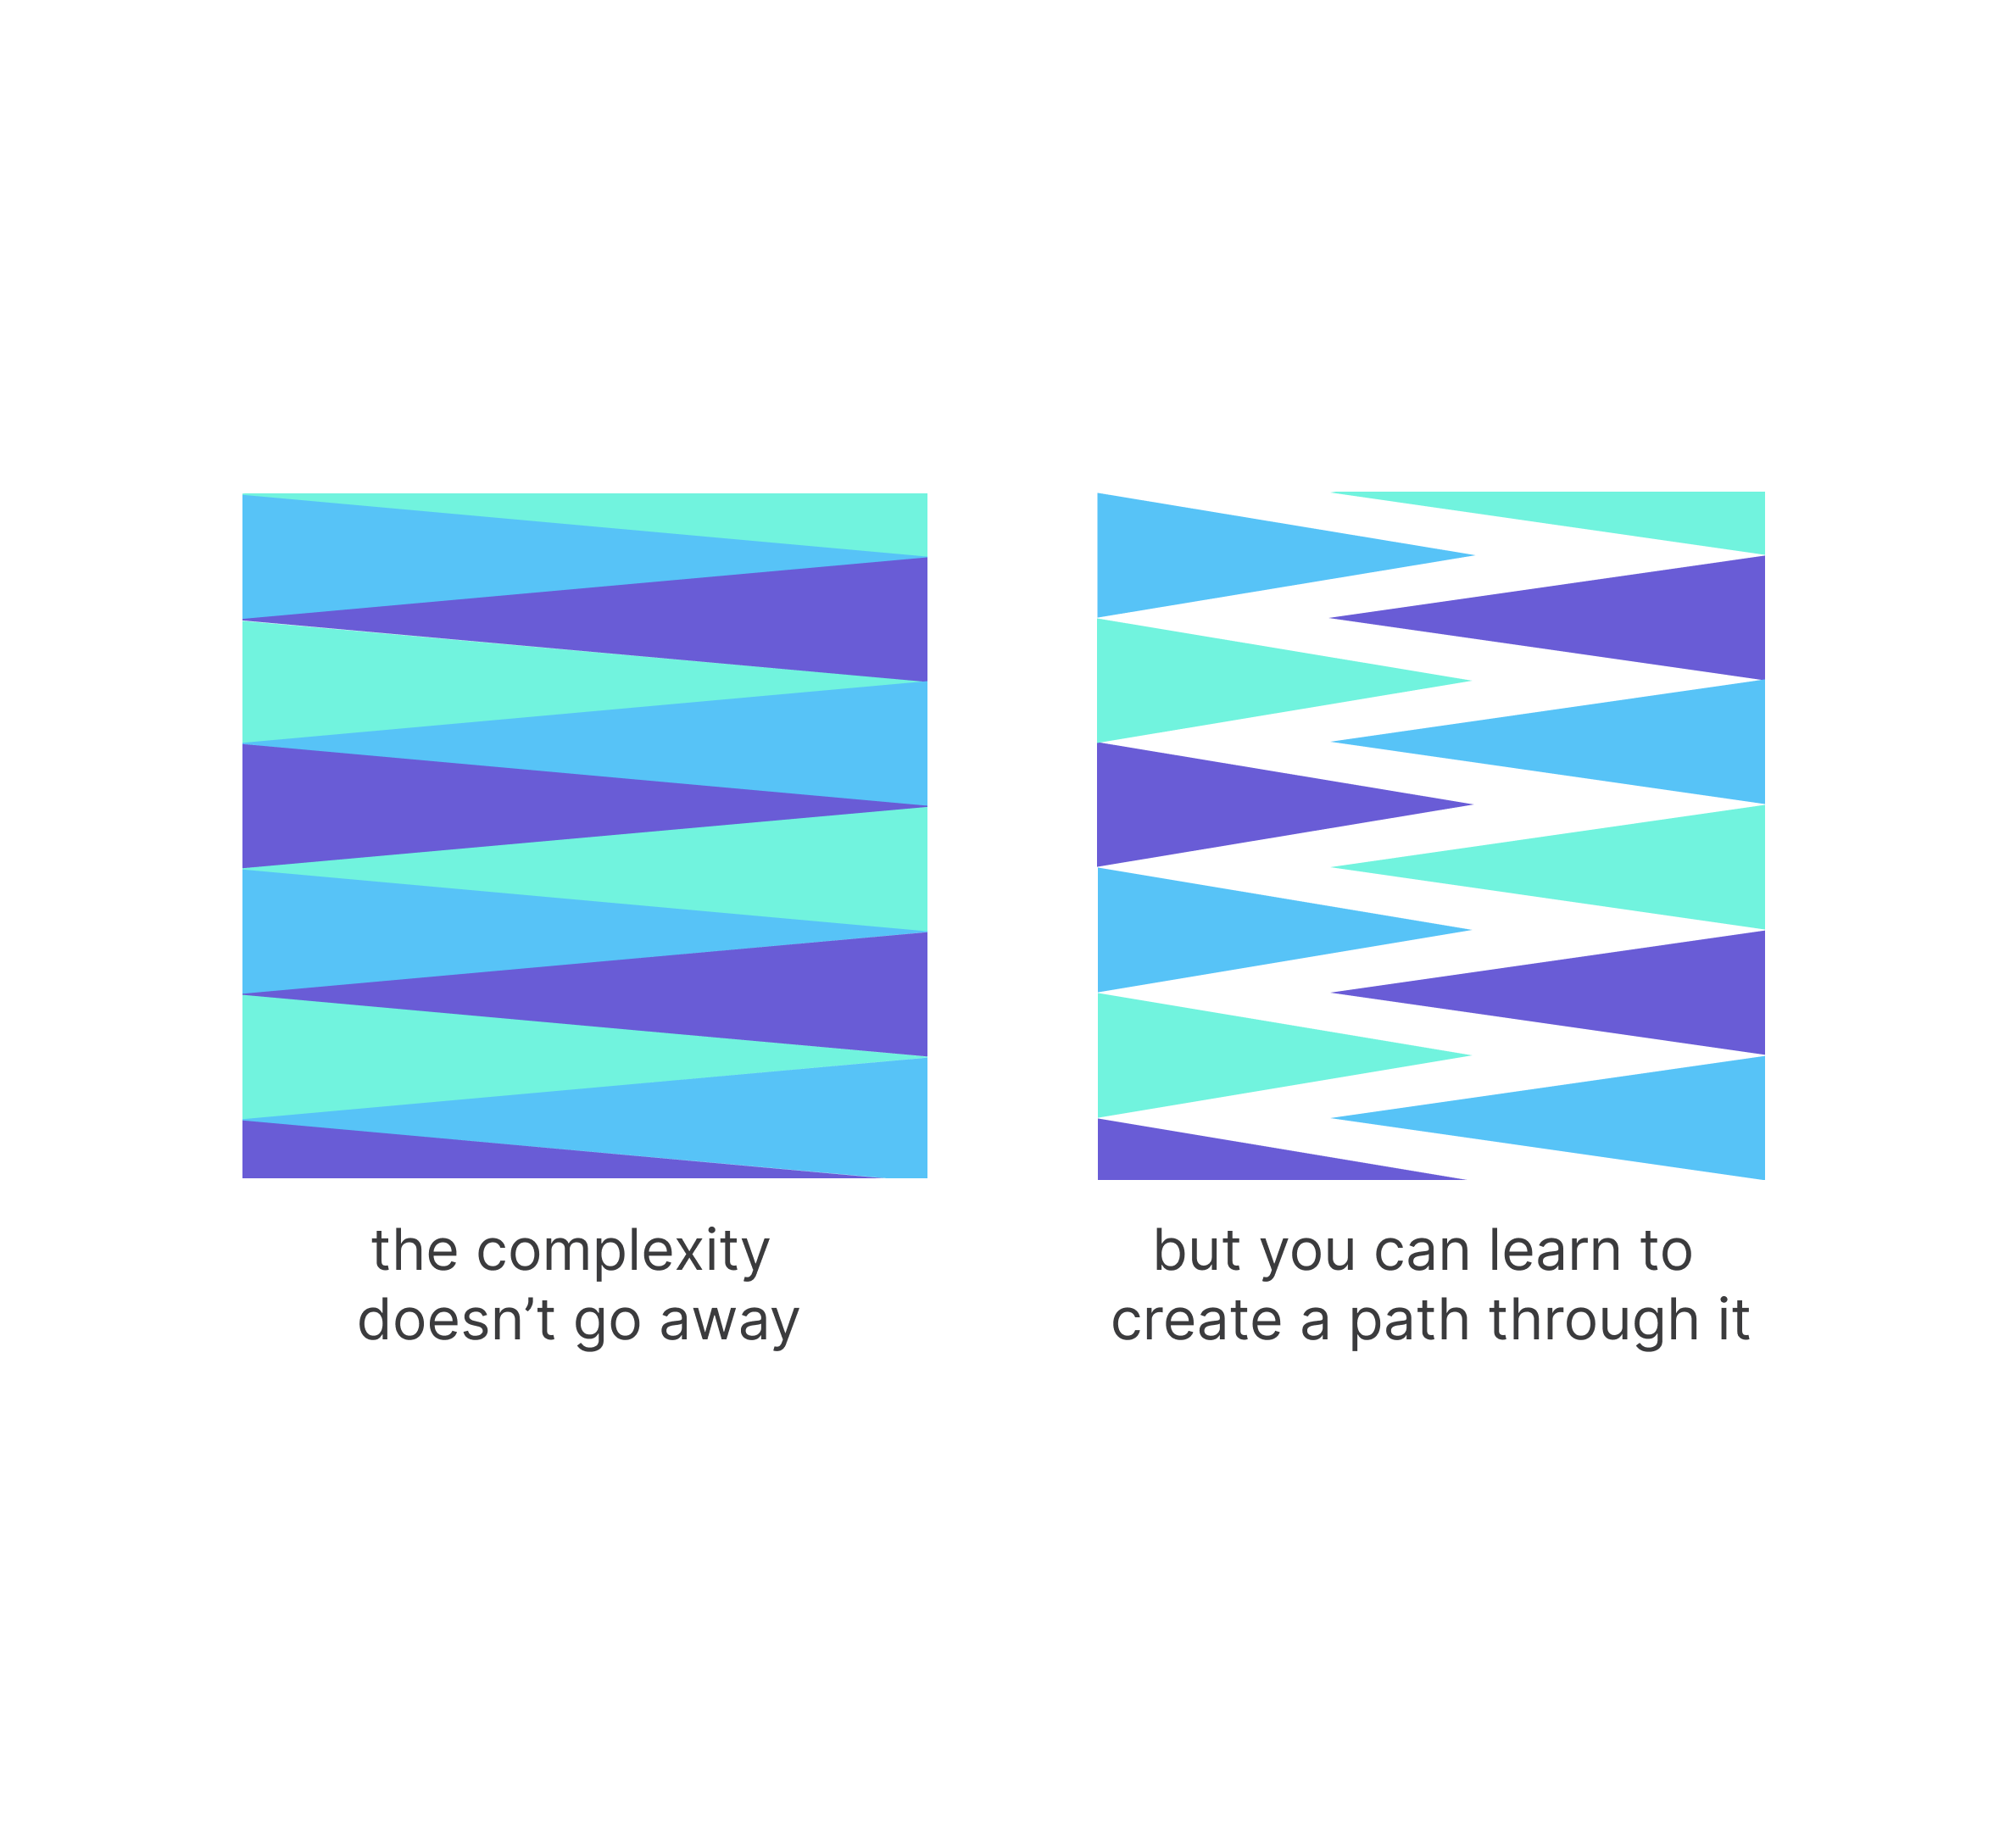 One block of interlocking colored triangles is captioned "the complexity doesn't go away." To the right of it is another block of triangles pulled back from one another showing a path through captioned "but you can learn to create a path through it"